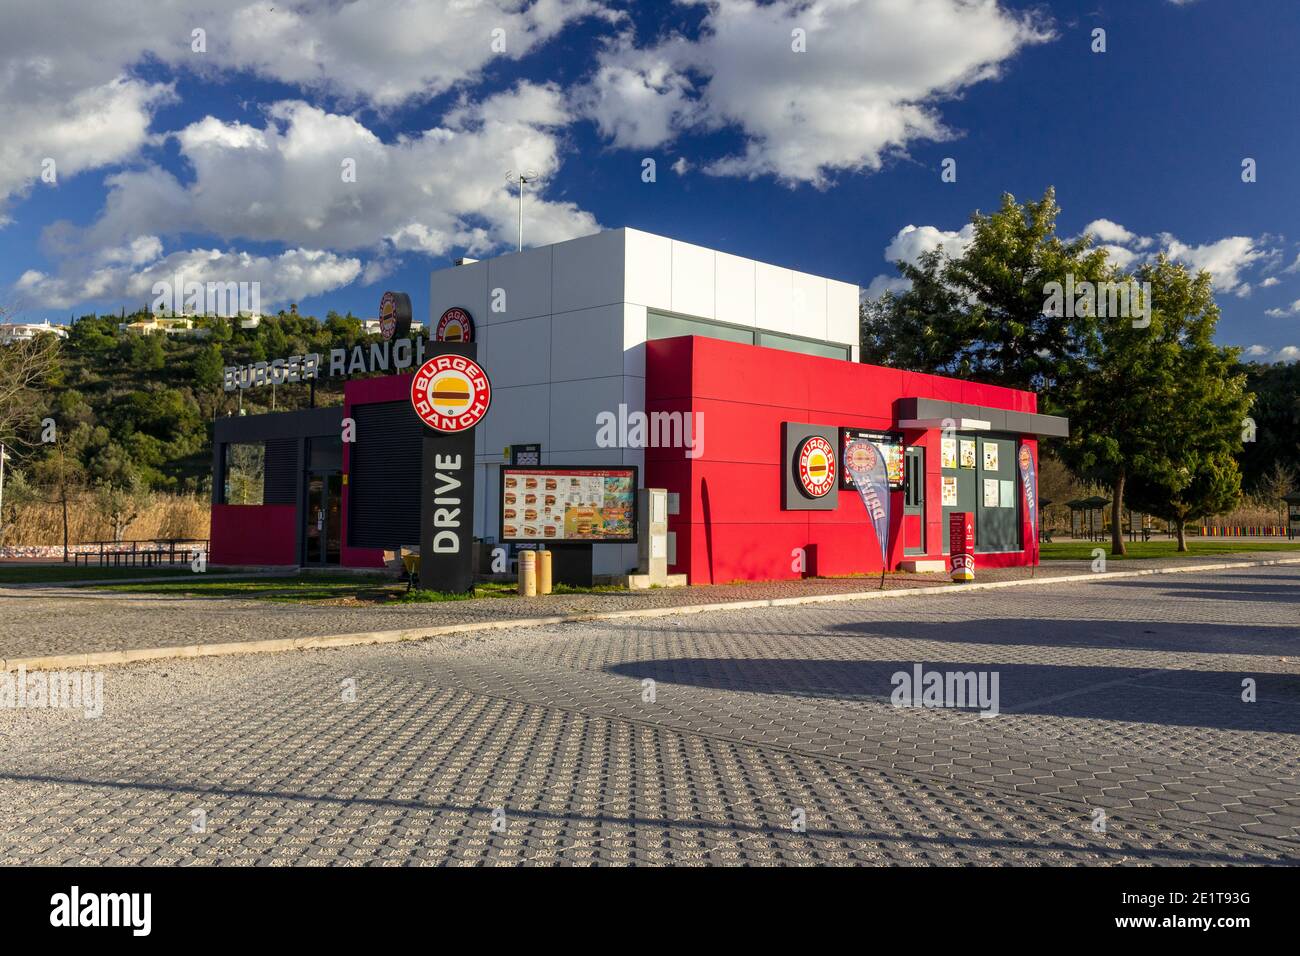 New Self Standing Burger Ranch Fast Food Restaurant In Silves Portugal, Burger Ranch Is A Portuguese Restaurant Chain Based In The Algarve Portugal Stock Photo